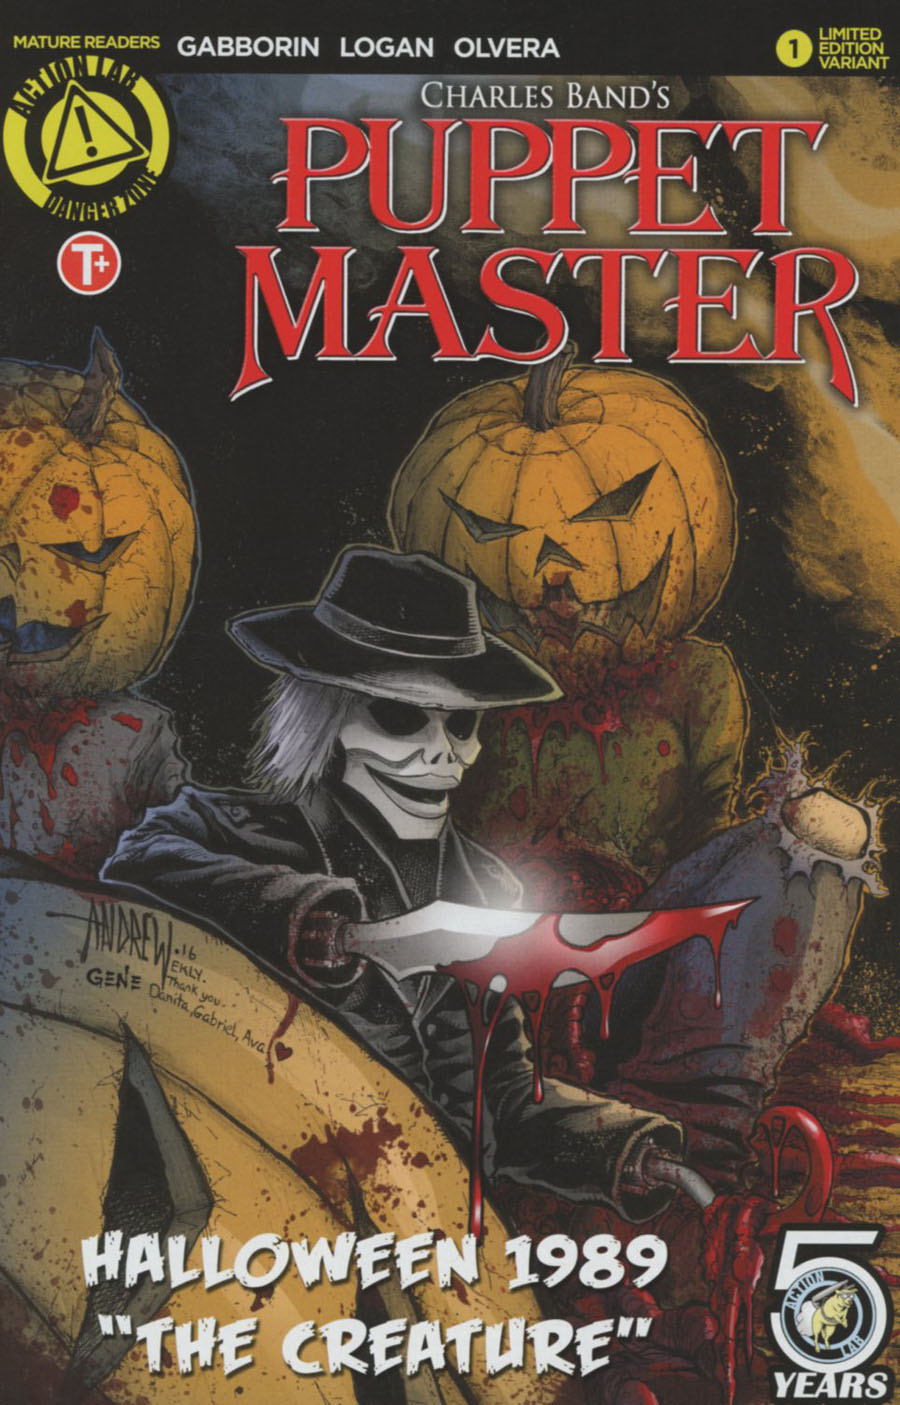 Puppet Master Halloween 1989 Special One Shot Cover C Variant Andrew Mangum Color Cover